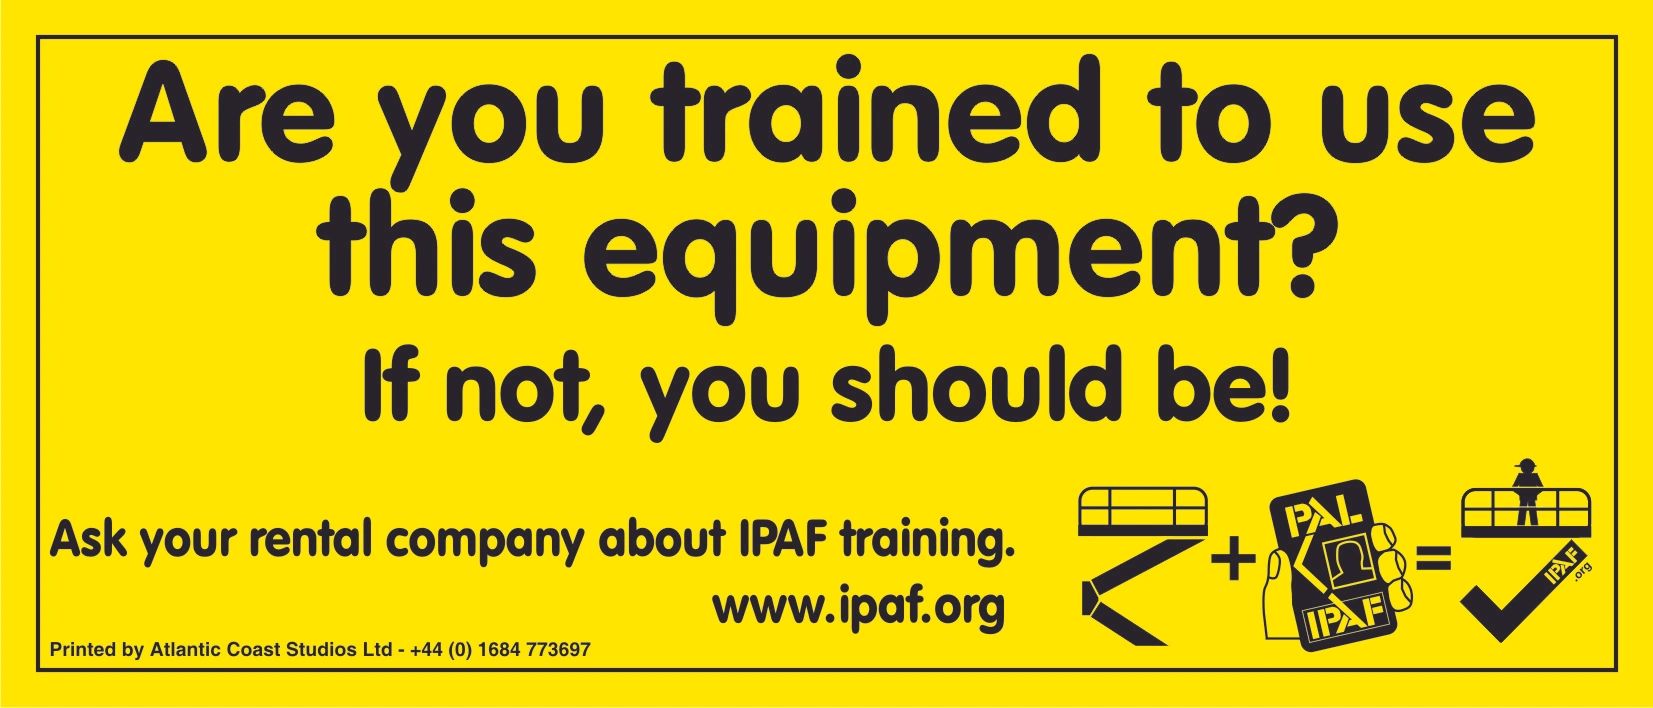 IPAF Approved Training Center. Operator and Instructor Certifications. Training meets OSHA and ANSI 